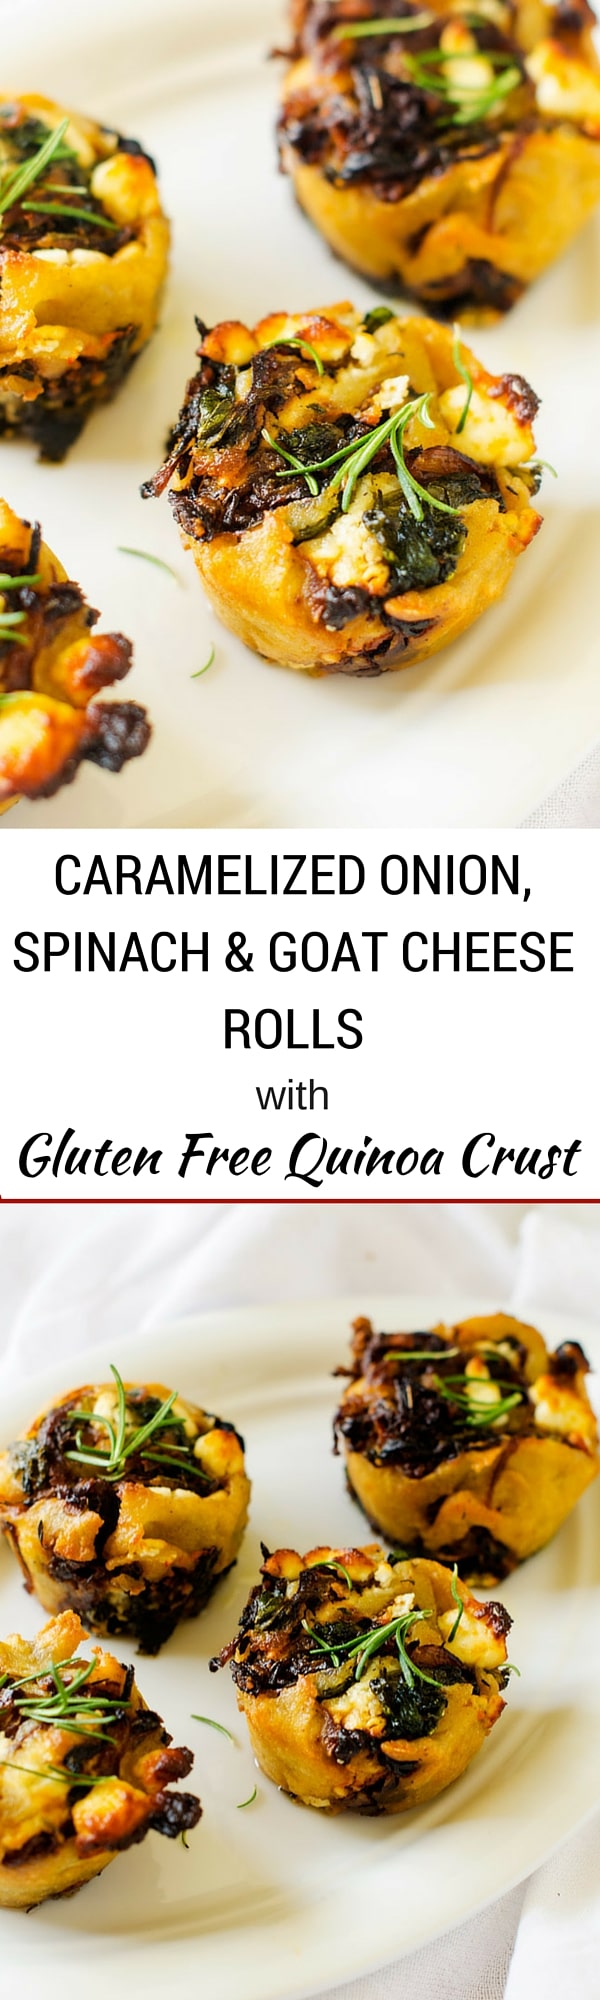 Caramelized Onion, Spinach & Goat Cheese Rolls with Gluten Free Quinoa Crust